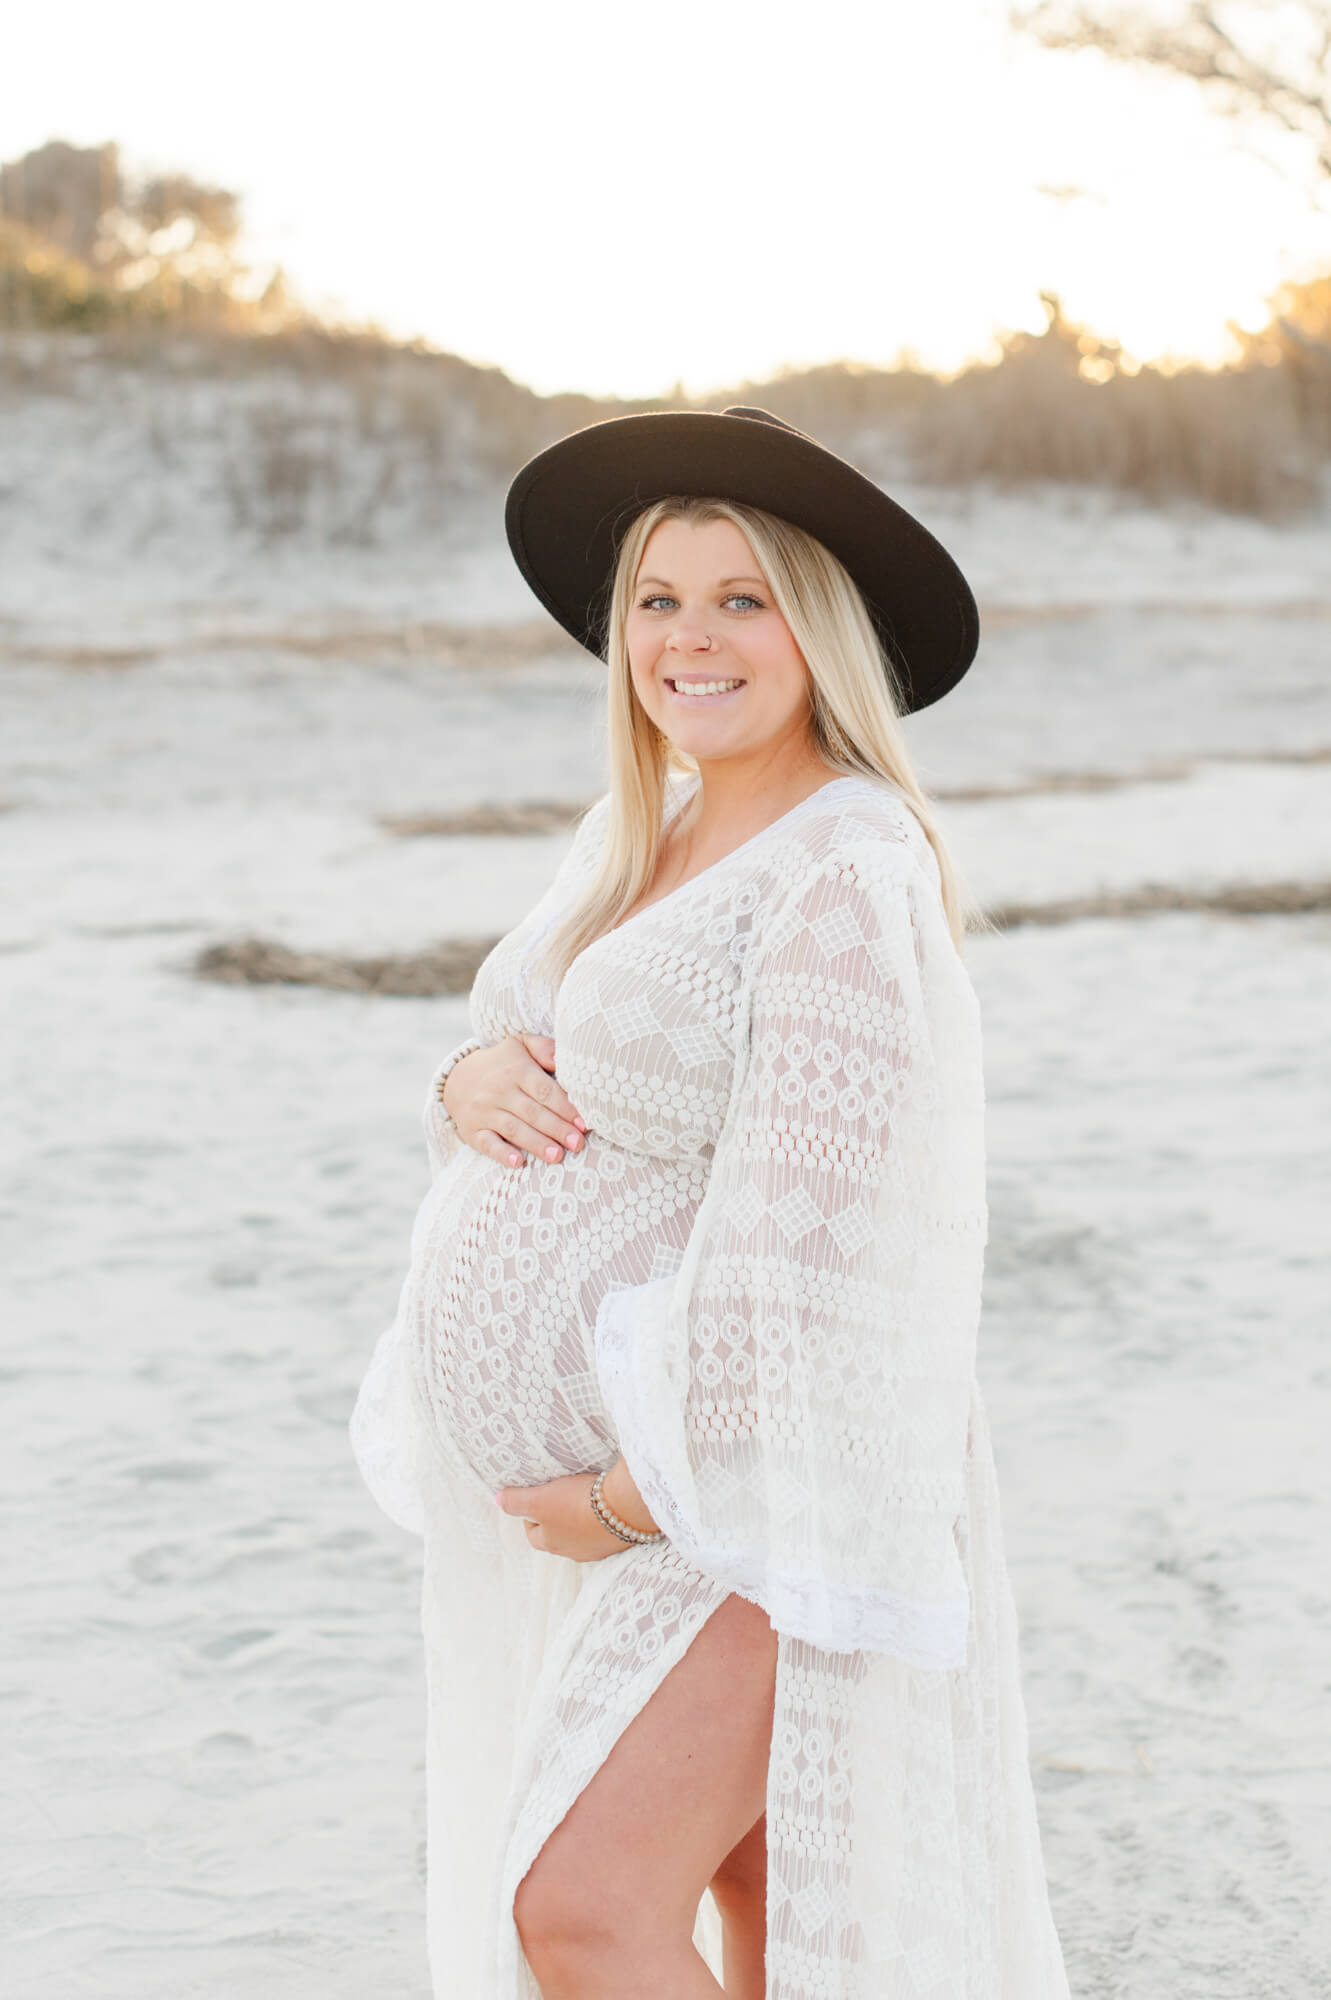 Expectant mother smiles at the camera during sunset while holding her belly in a white lace gown!